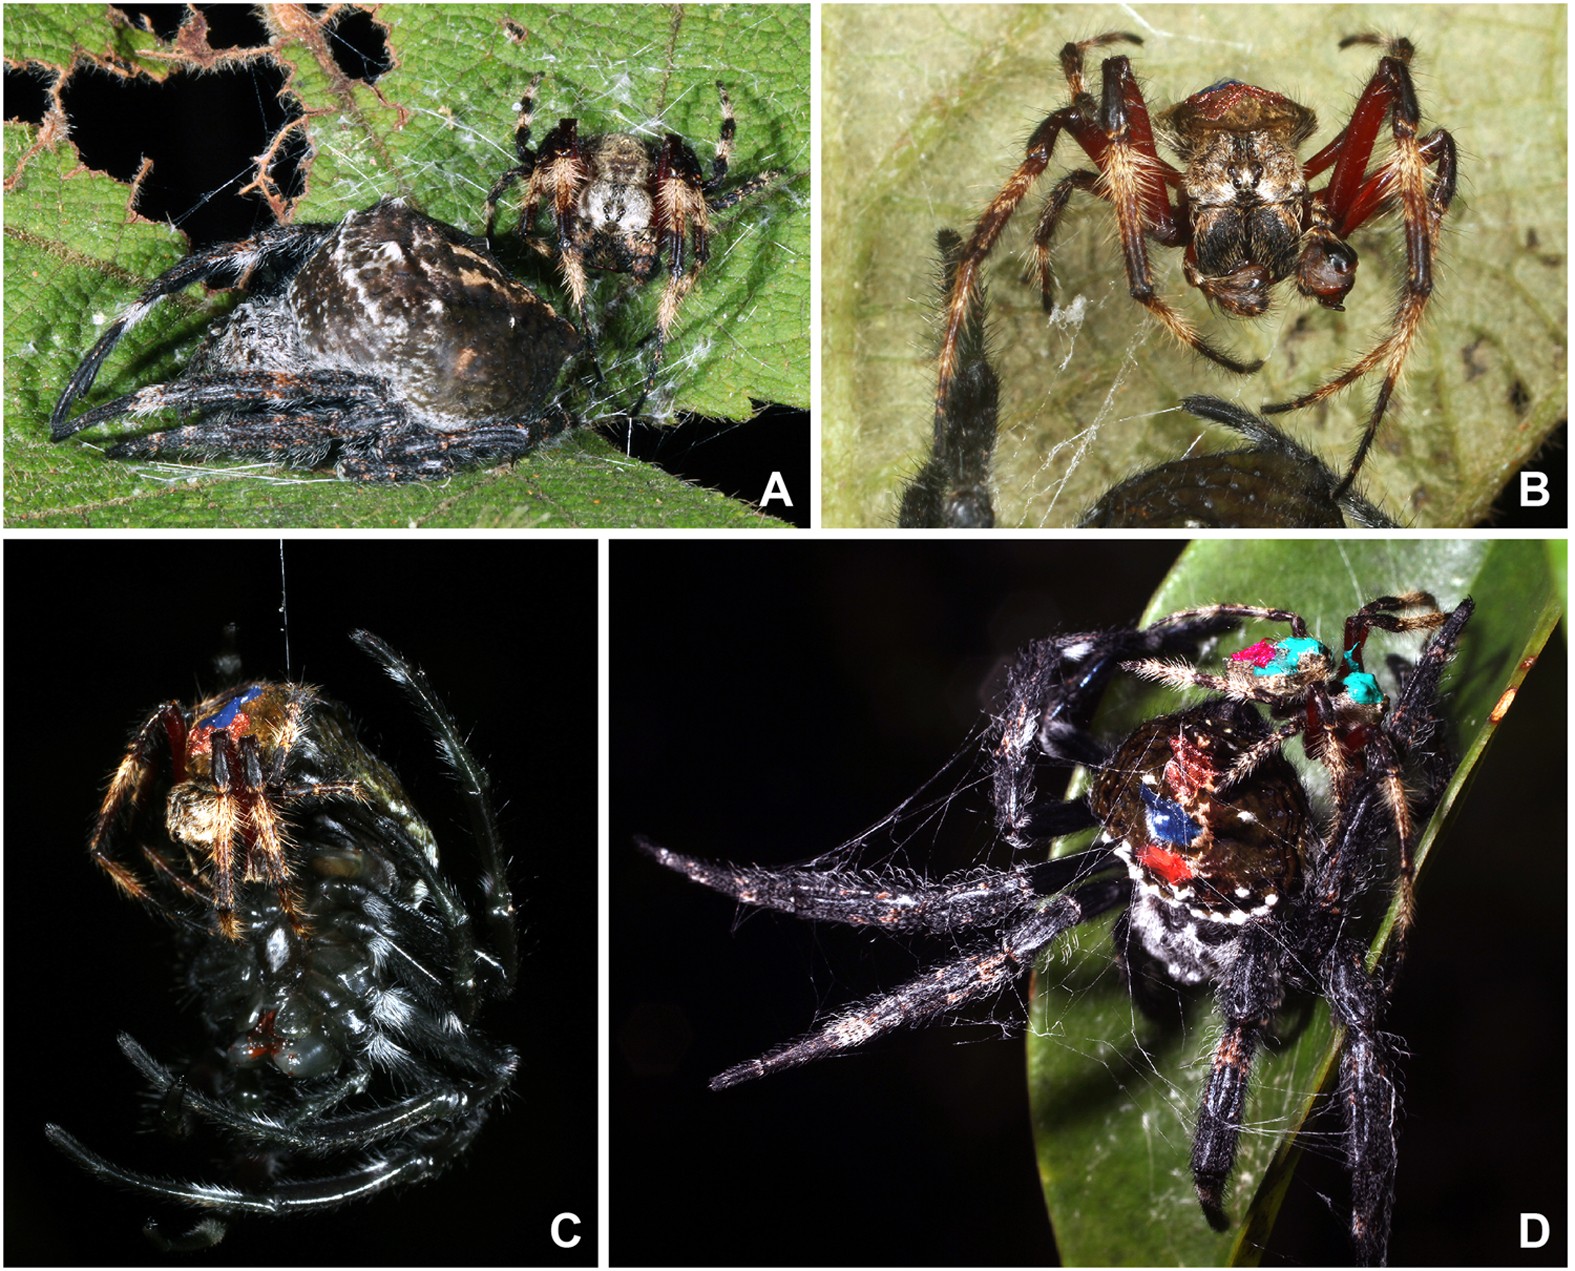 Male orb-weaving spiders fight less in female-dominated colonies